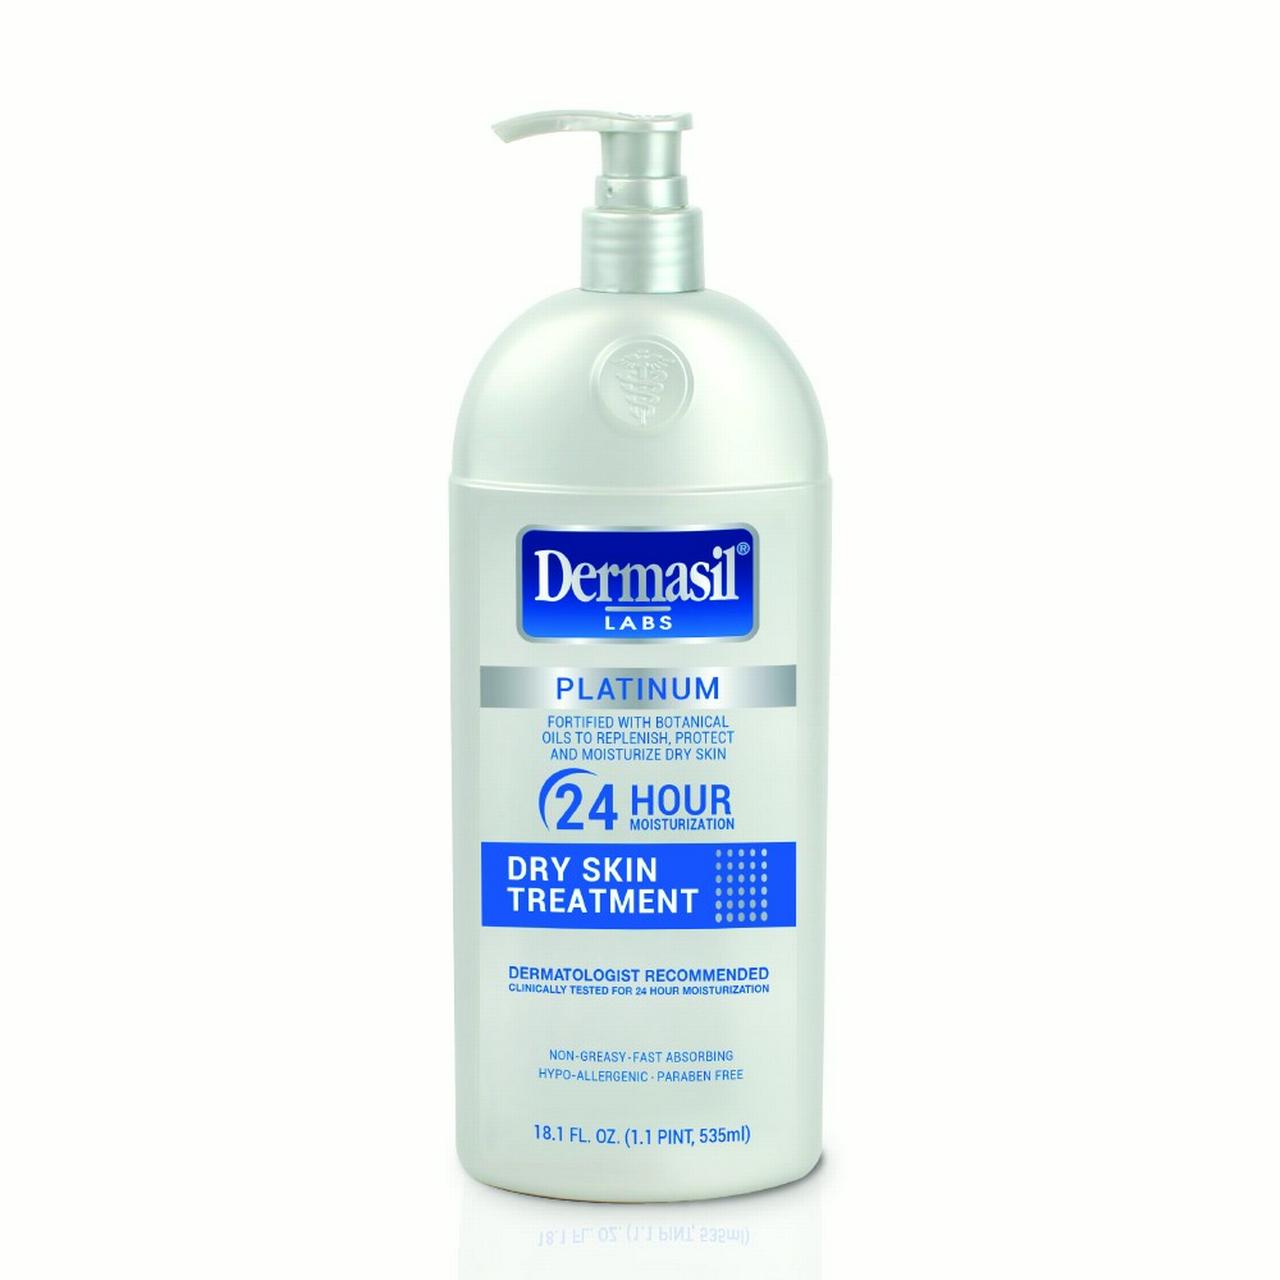 Dermasil Labs Platinum Hand and Body Lotion 3-Pack Dry Skin Treatment - image 2 of 5